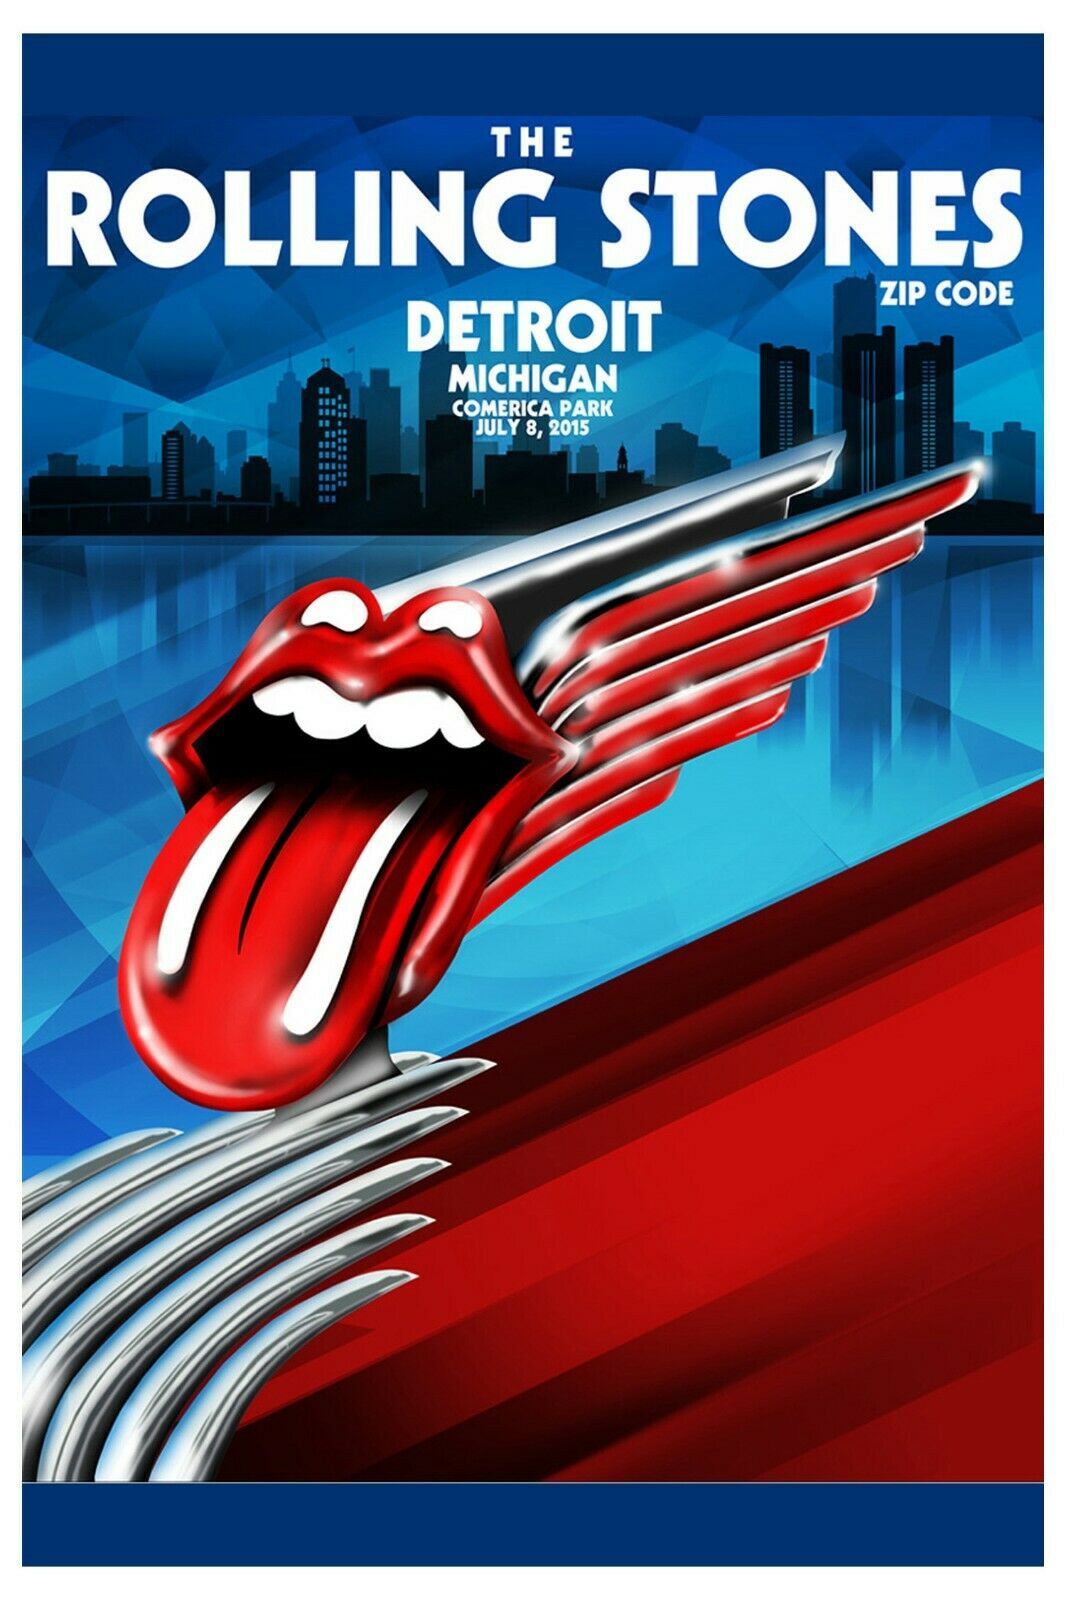 British Rock: The Rolling Stones At Detroit Concert Poster 2015  13x19